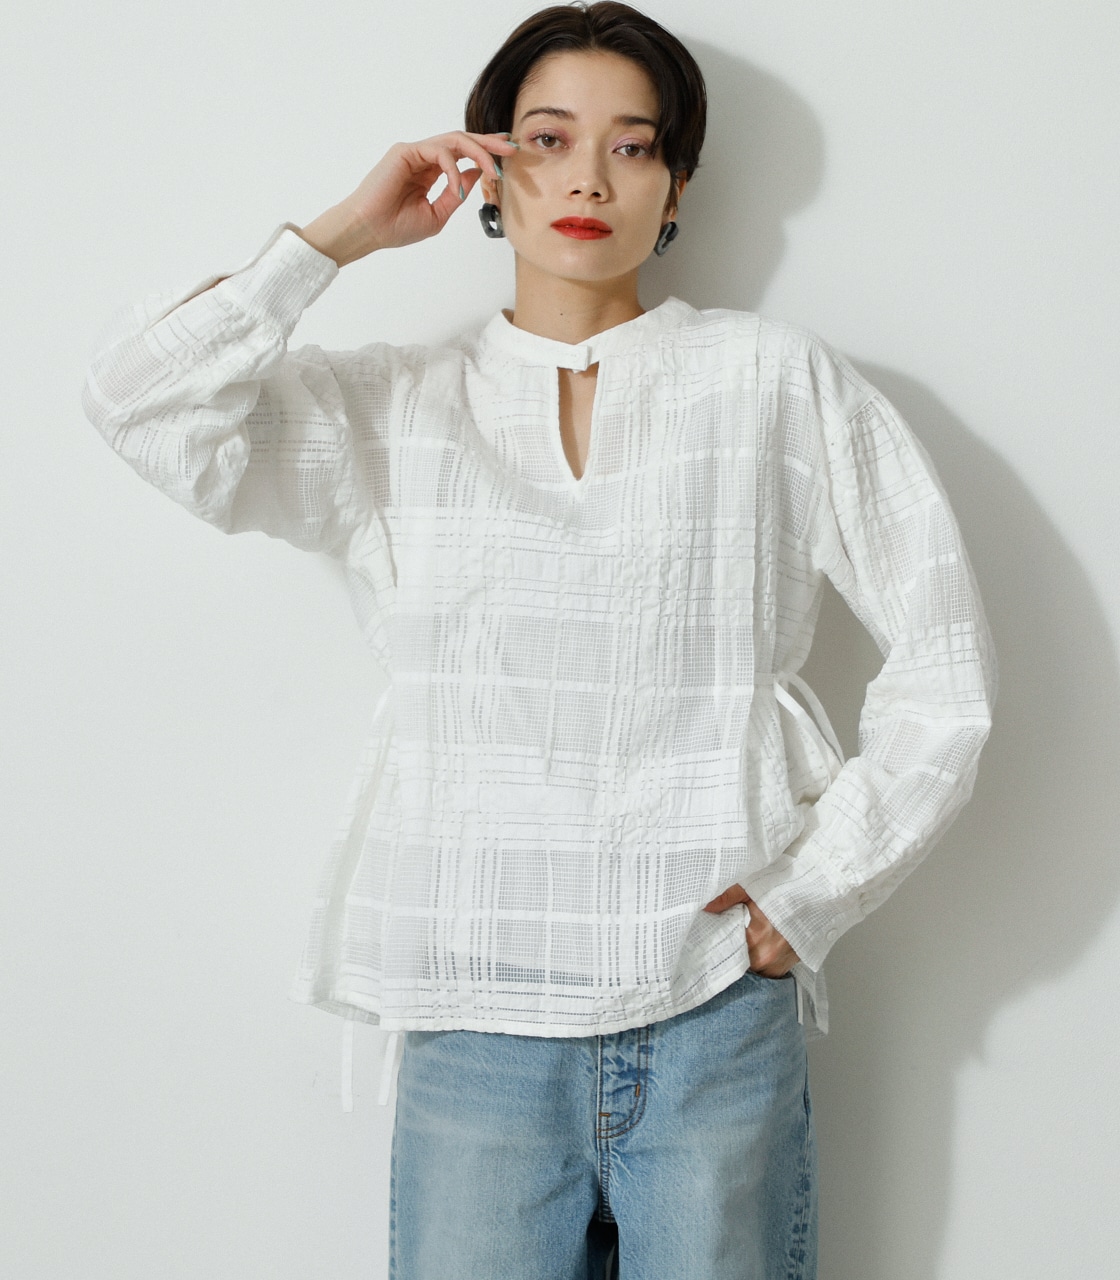 SHEER CHECK BLOUSE/シアーチェックブラウス 詳細画像 WHT 1